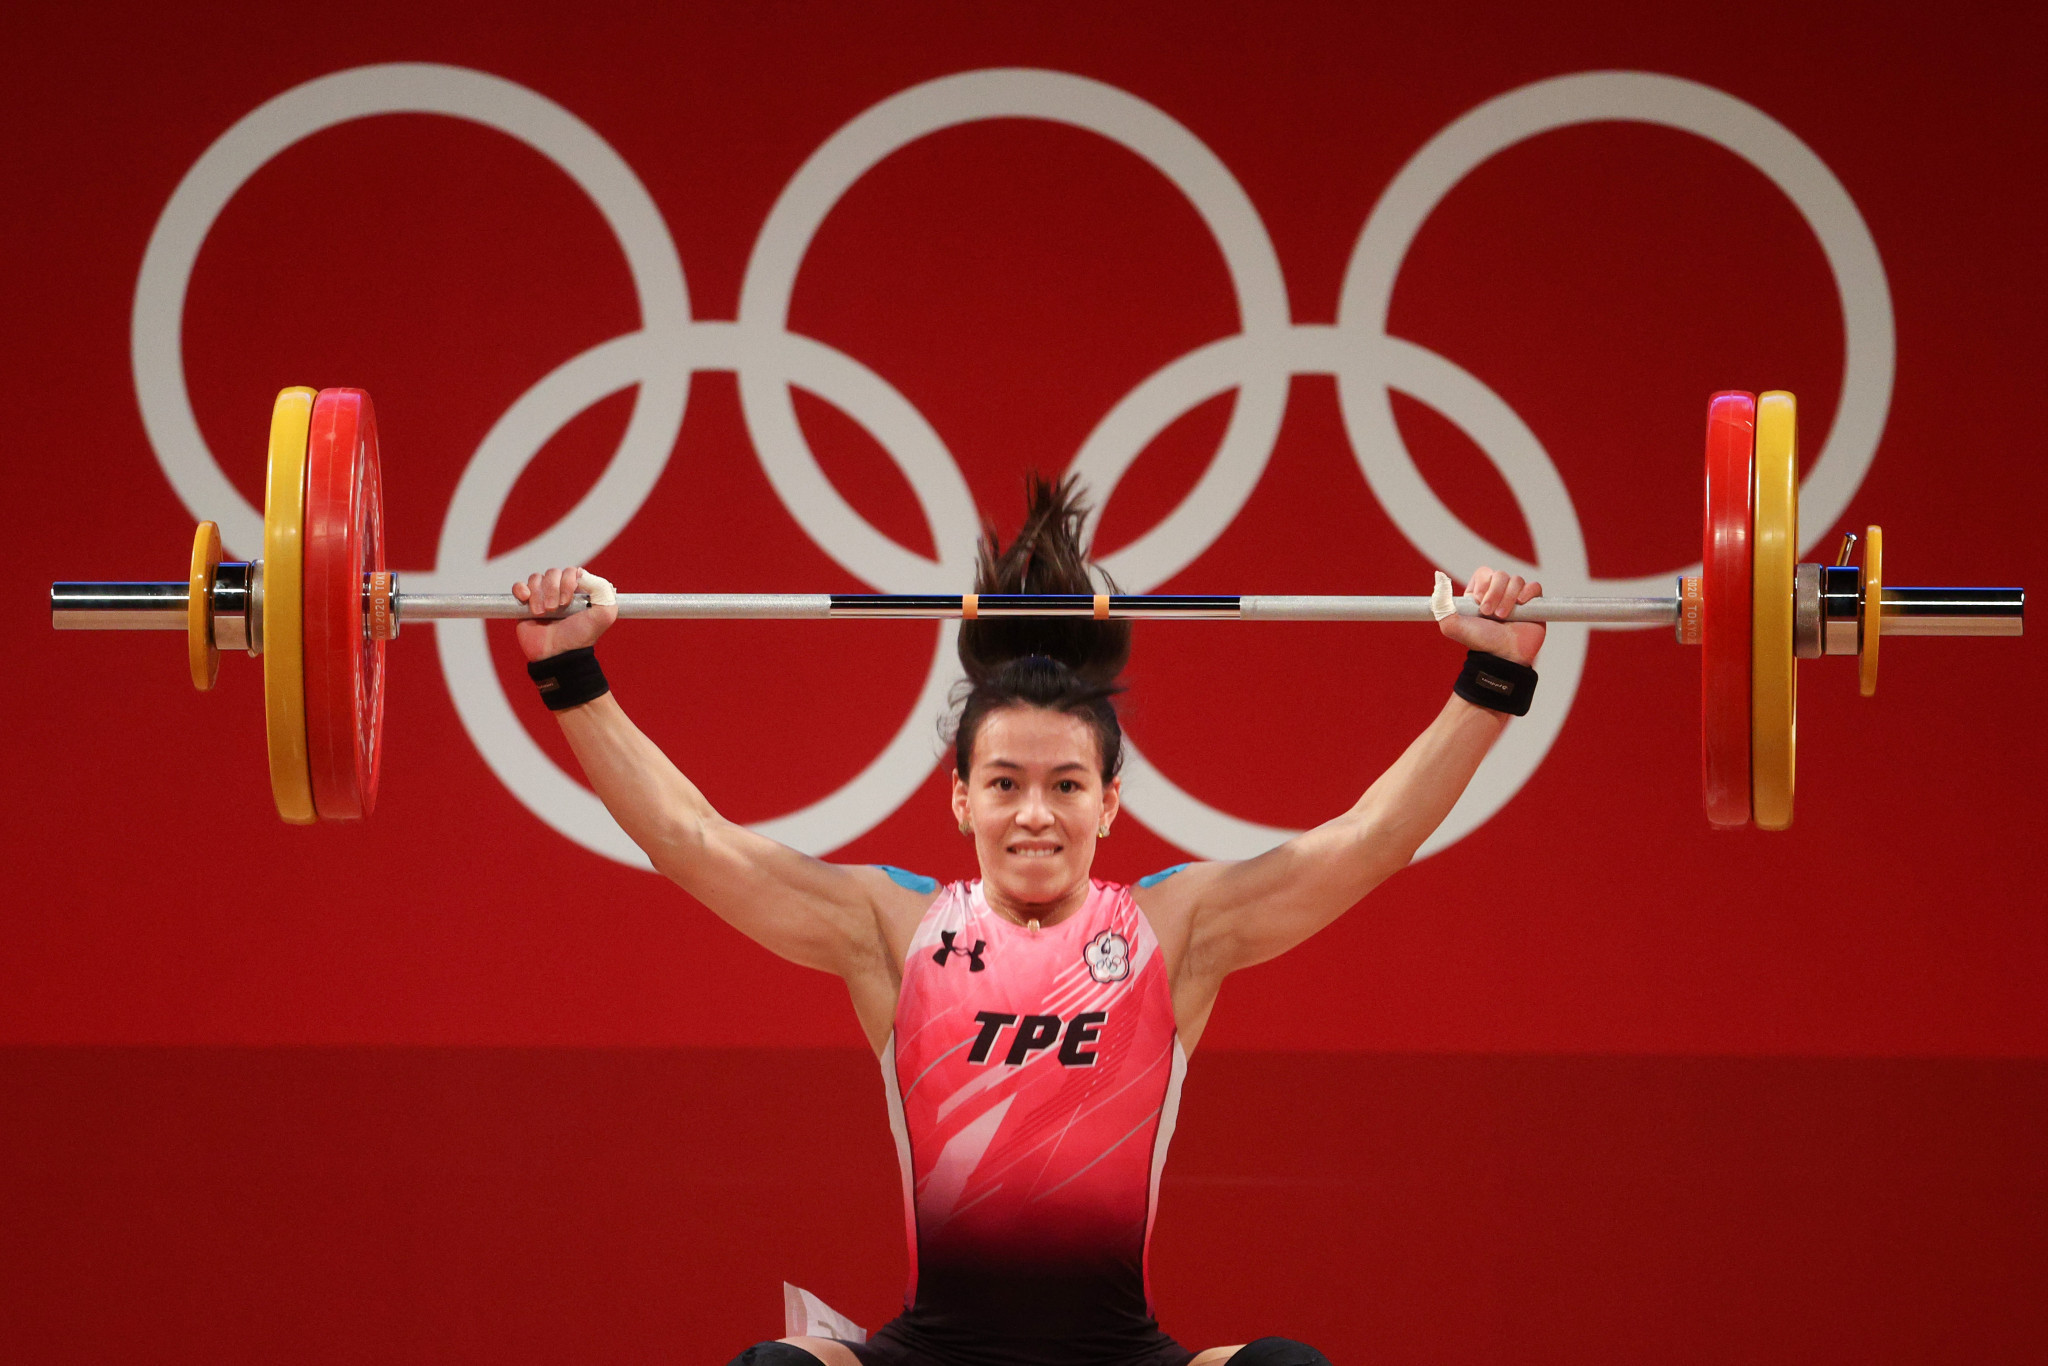 Olympic gold, Vogue front cover, and another world title for weightlifter Kuo